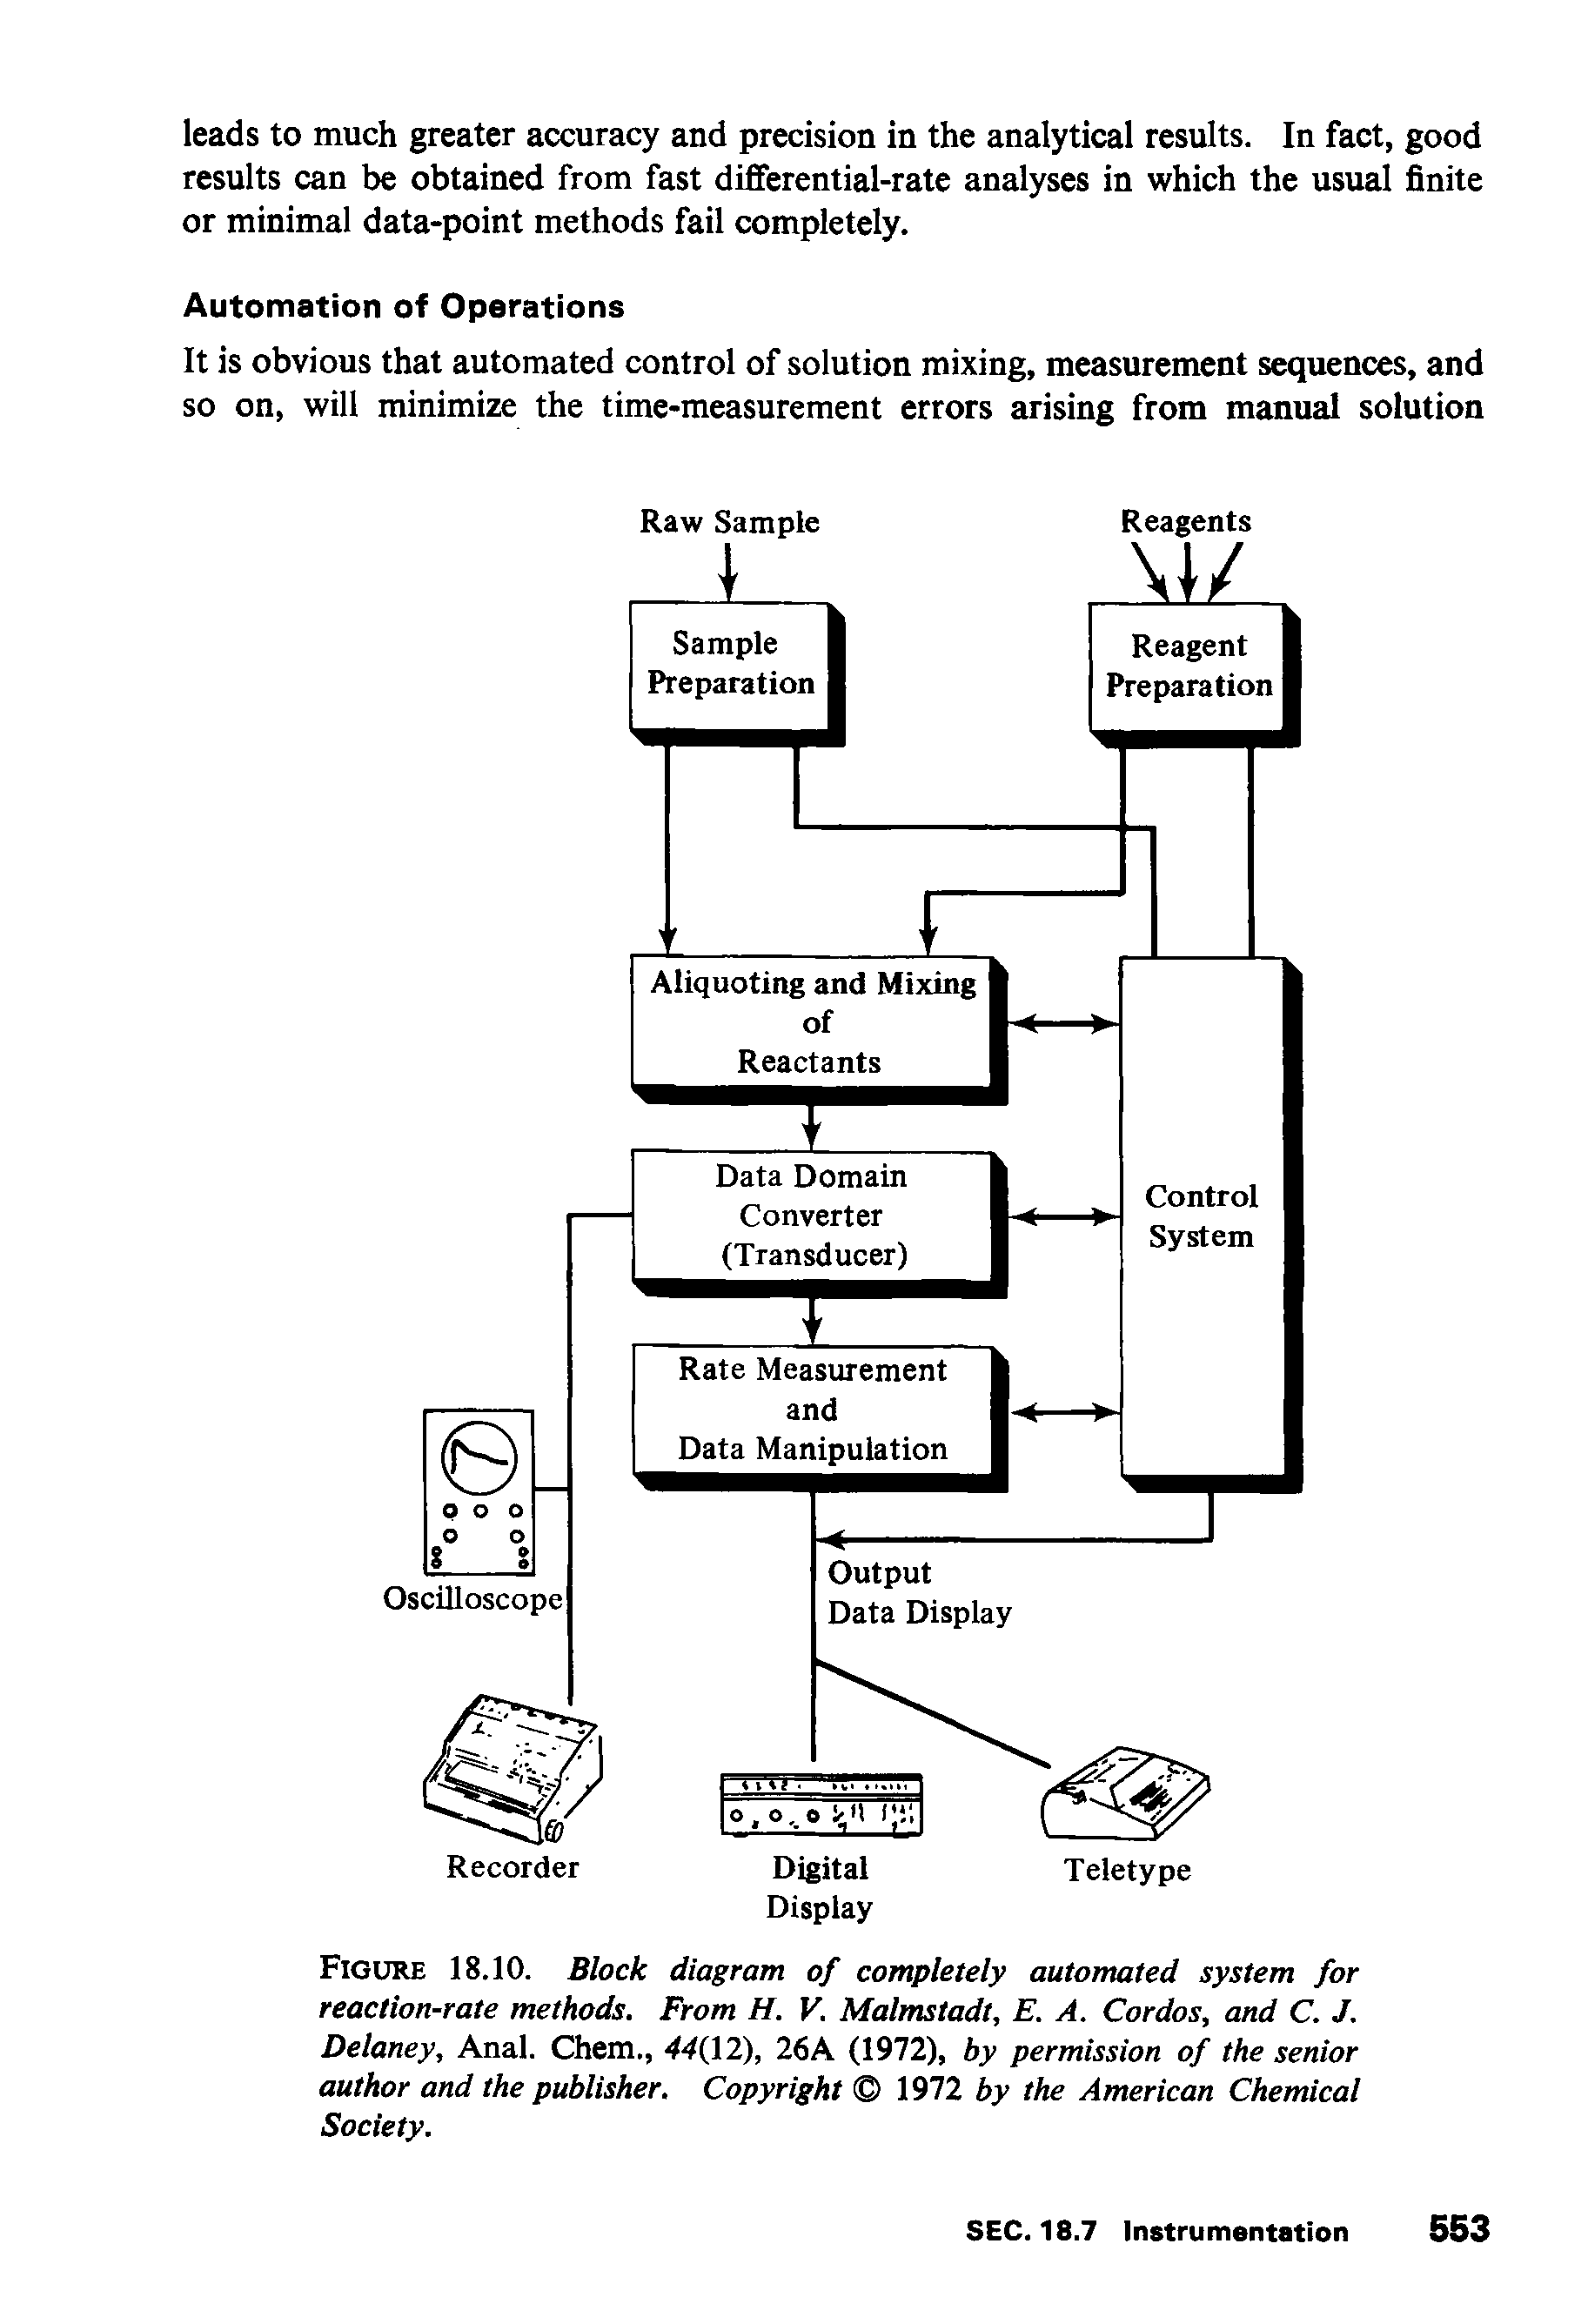 Figure 18.10. Block diagram of completely automated system for reaction-rate methods. From H. V. Malmstadt, E. A. Cordos, and C. J. Delaney, Anal. Chem., 44 2), 26A (1972), by permission of the senior author and the publisher. Copyright 1972 by the American Chemical Society.